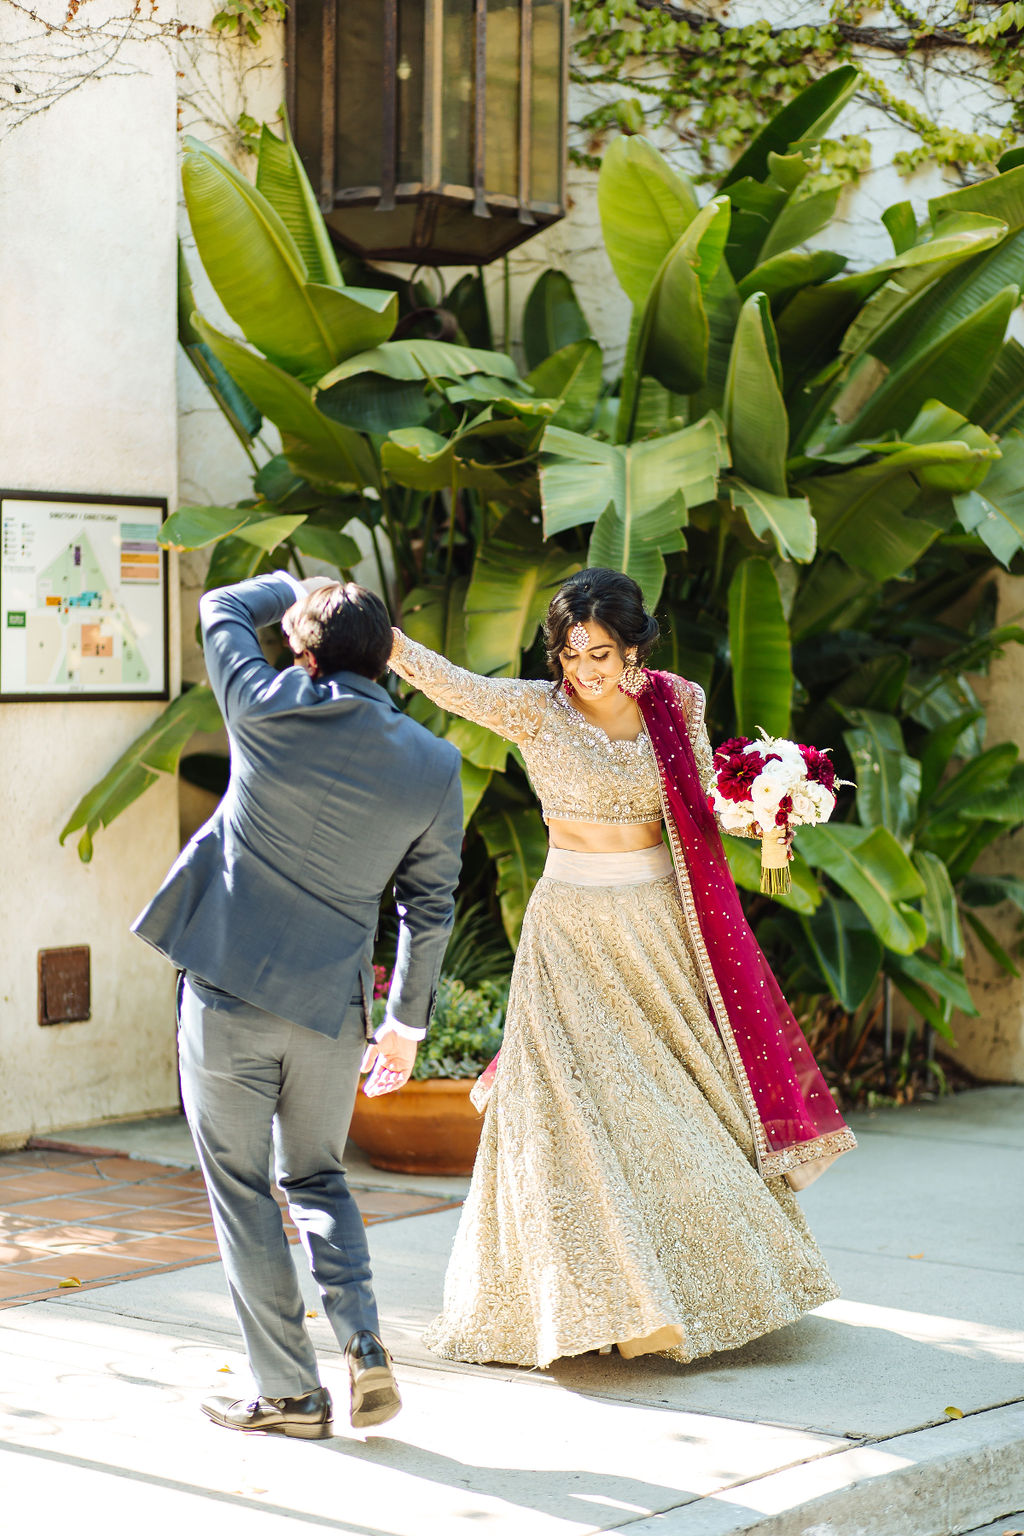 bride wearing embellished golden wedding saree and groom in dark grey suit with maroon tie dance at Los Angeles River and Garden Center